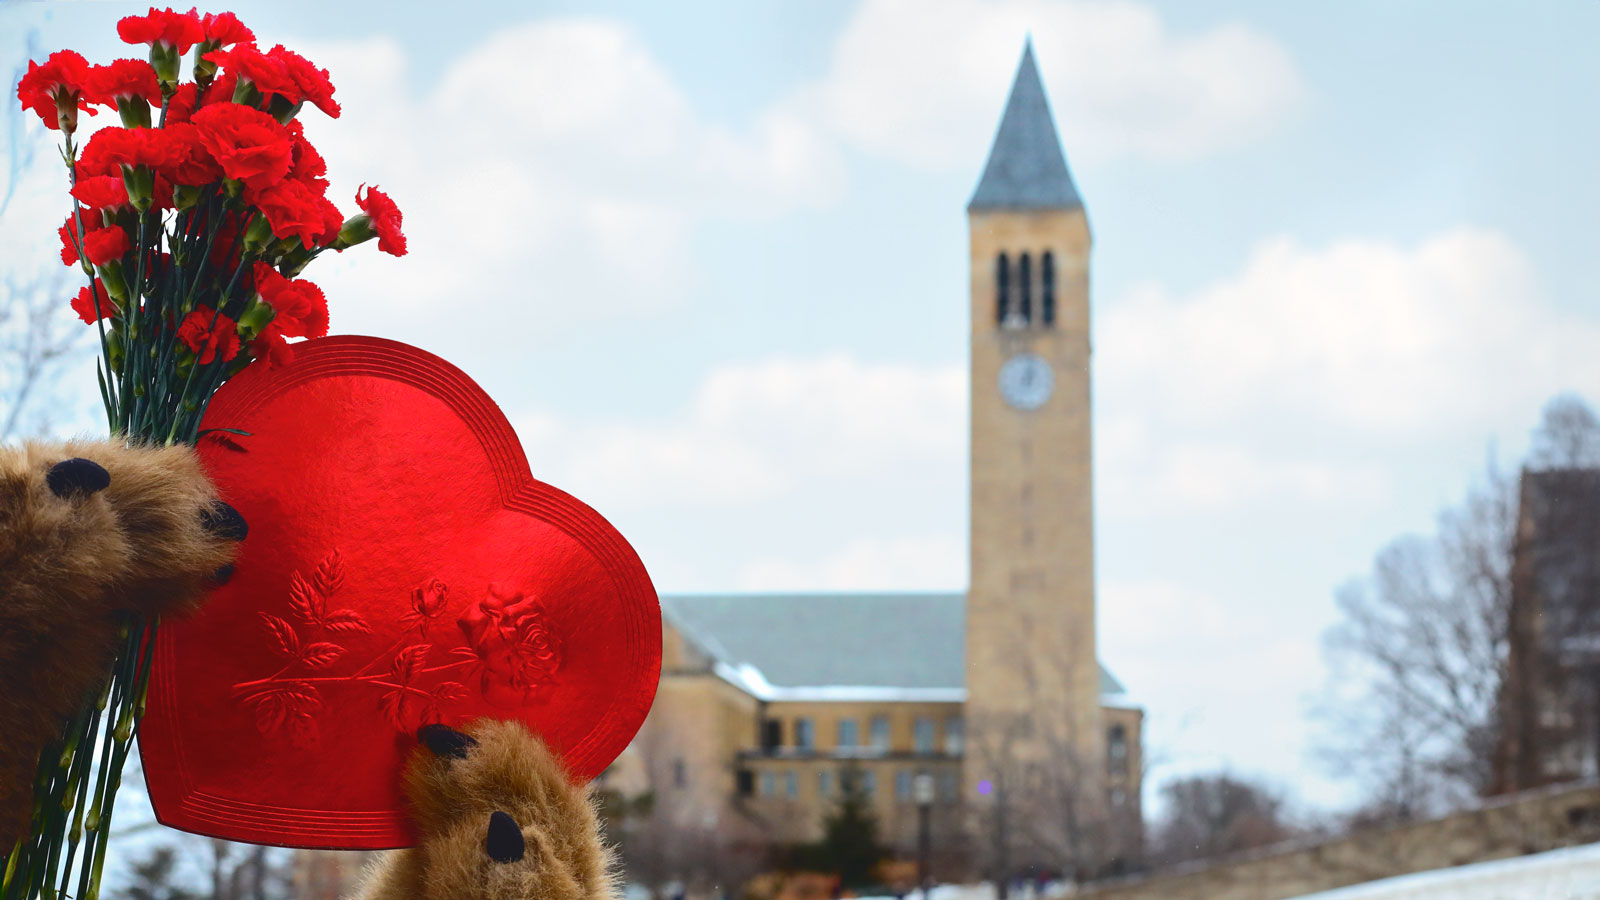 Touchdown's paws holding red carnations and a heart shaped box of chocolates, in front of the Cornell clocktower